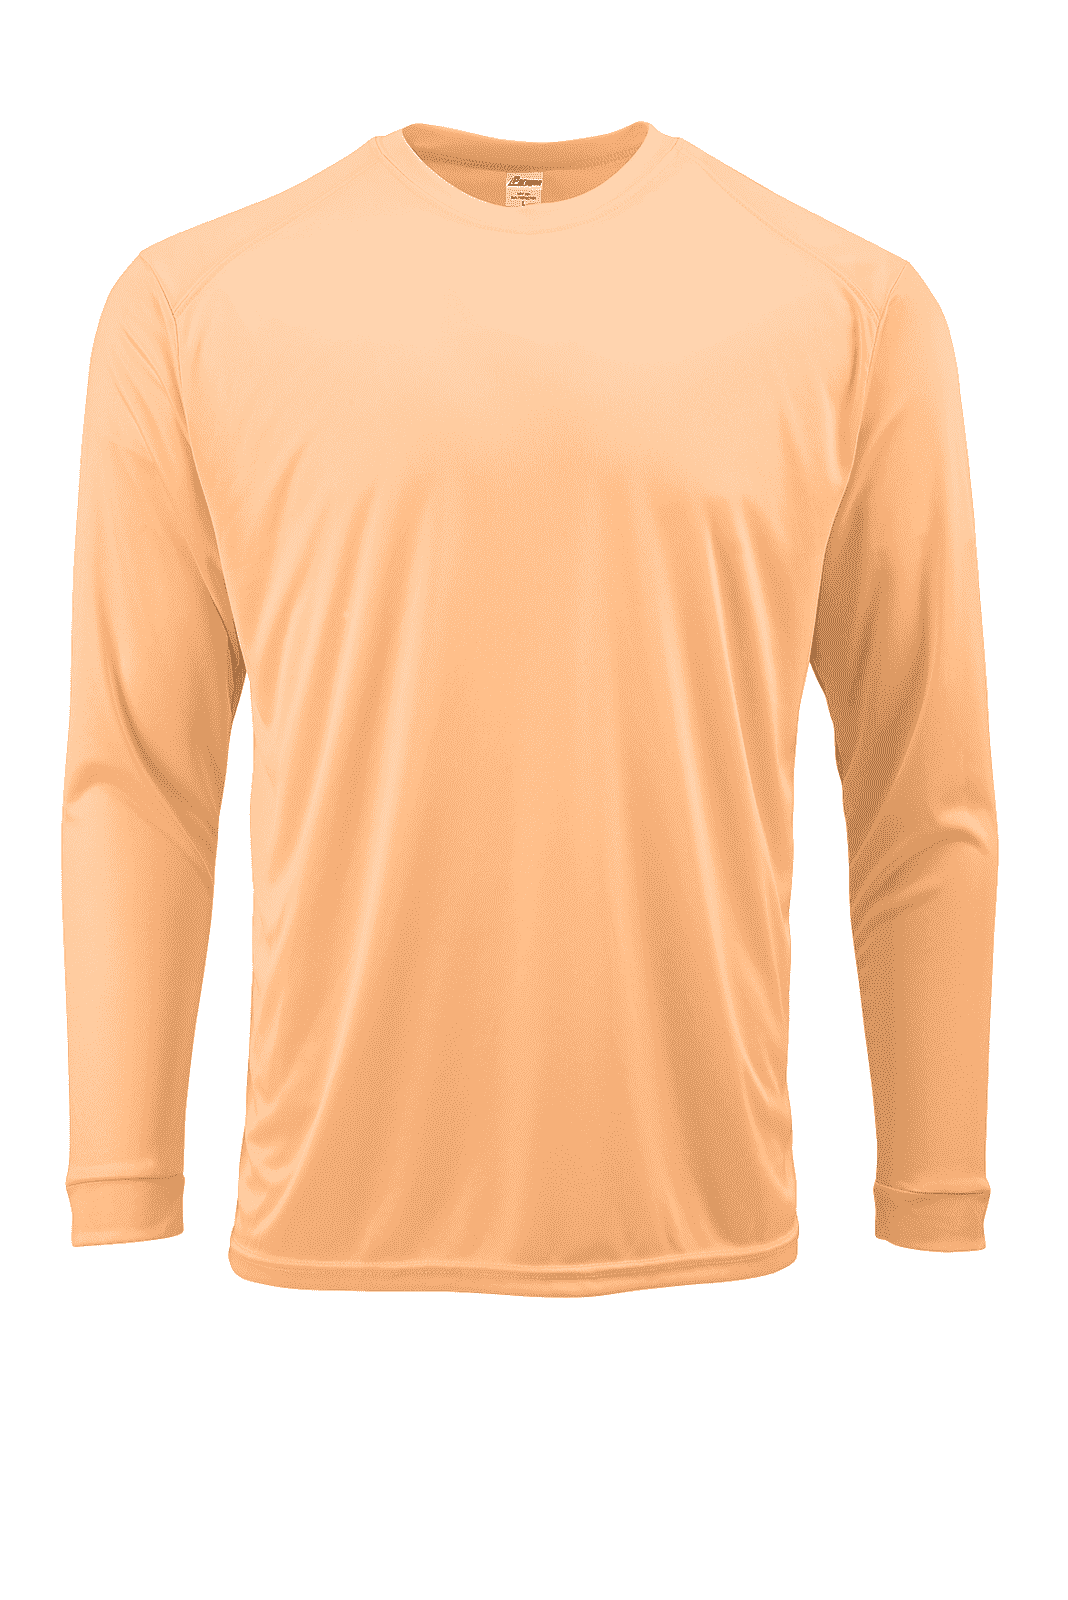 Paragon 210 Adult Long Sleeve Performance Tee - Coral - HIT a Double